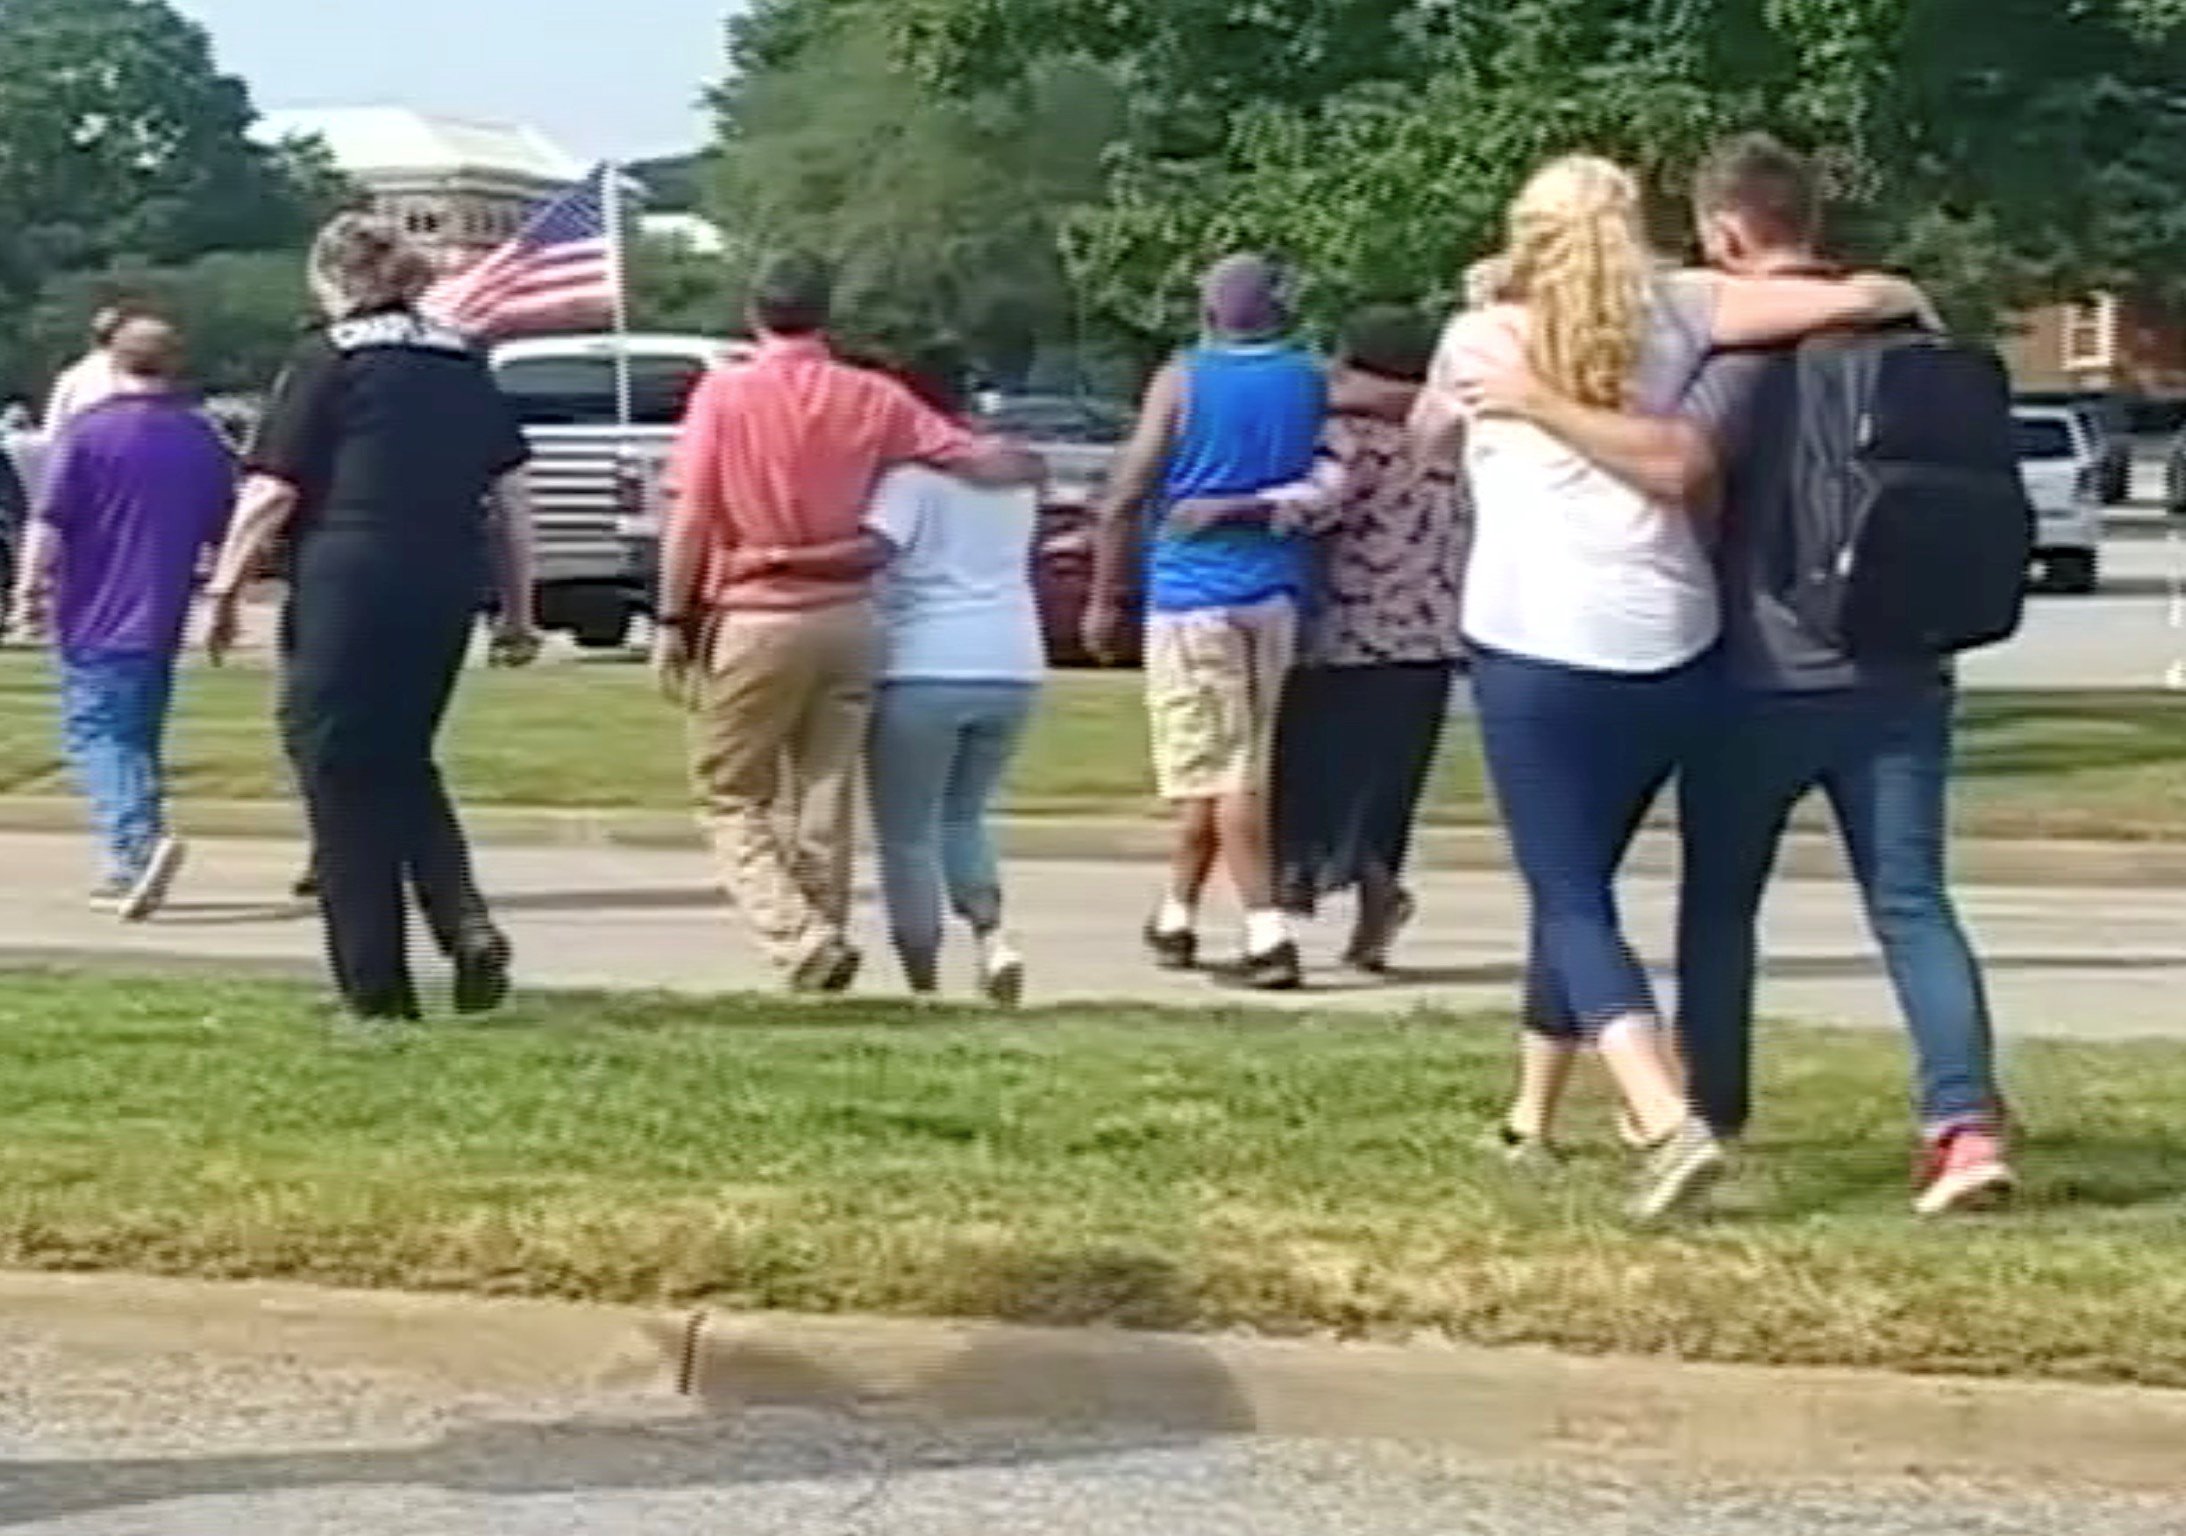 Evacuees walk away from a building in this still image taken from video following a shooting incident at the municipal center in Virginia Beach, Virginia, U.S. May 31, 2019. WAVY-TV/NBC/via REUTERS